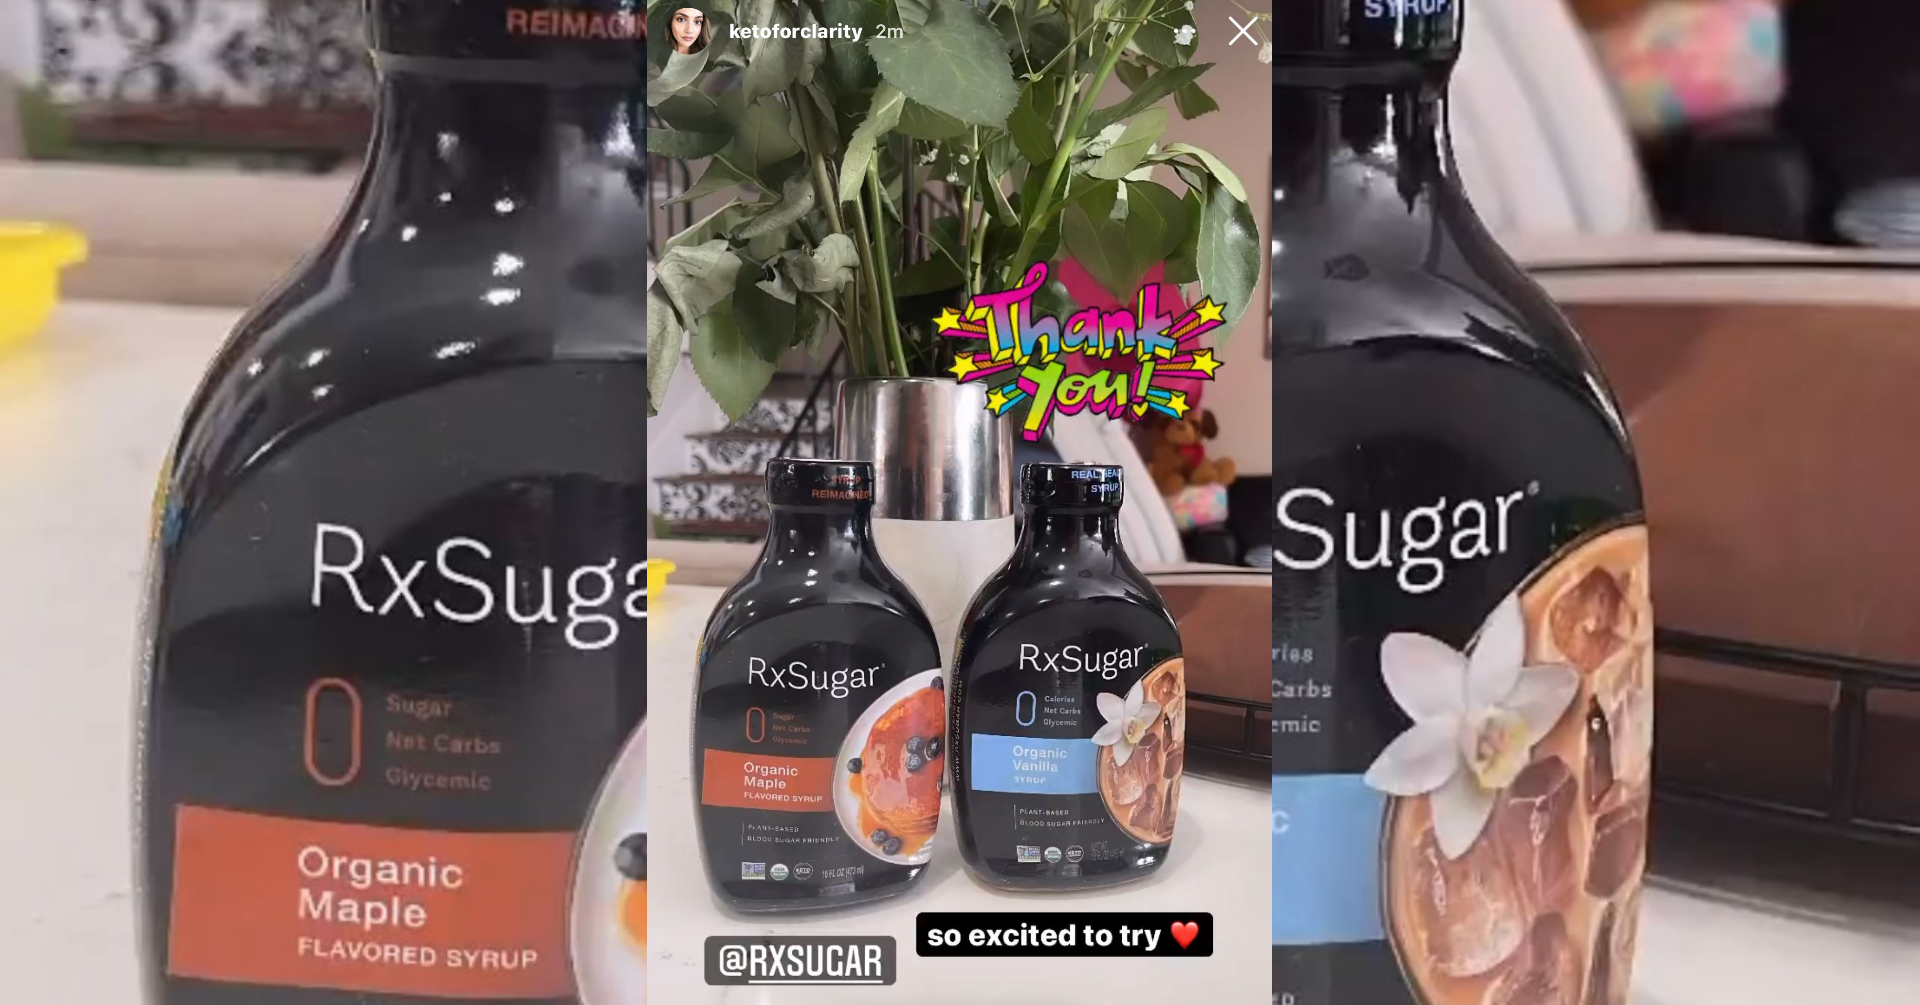 Keto For Clarity Loving Her New RxSugar!